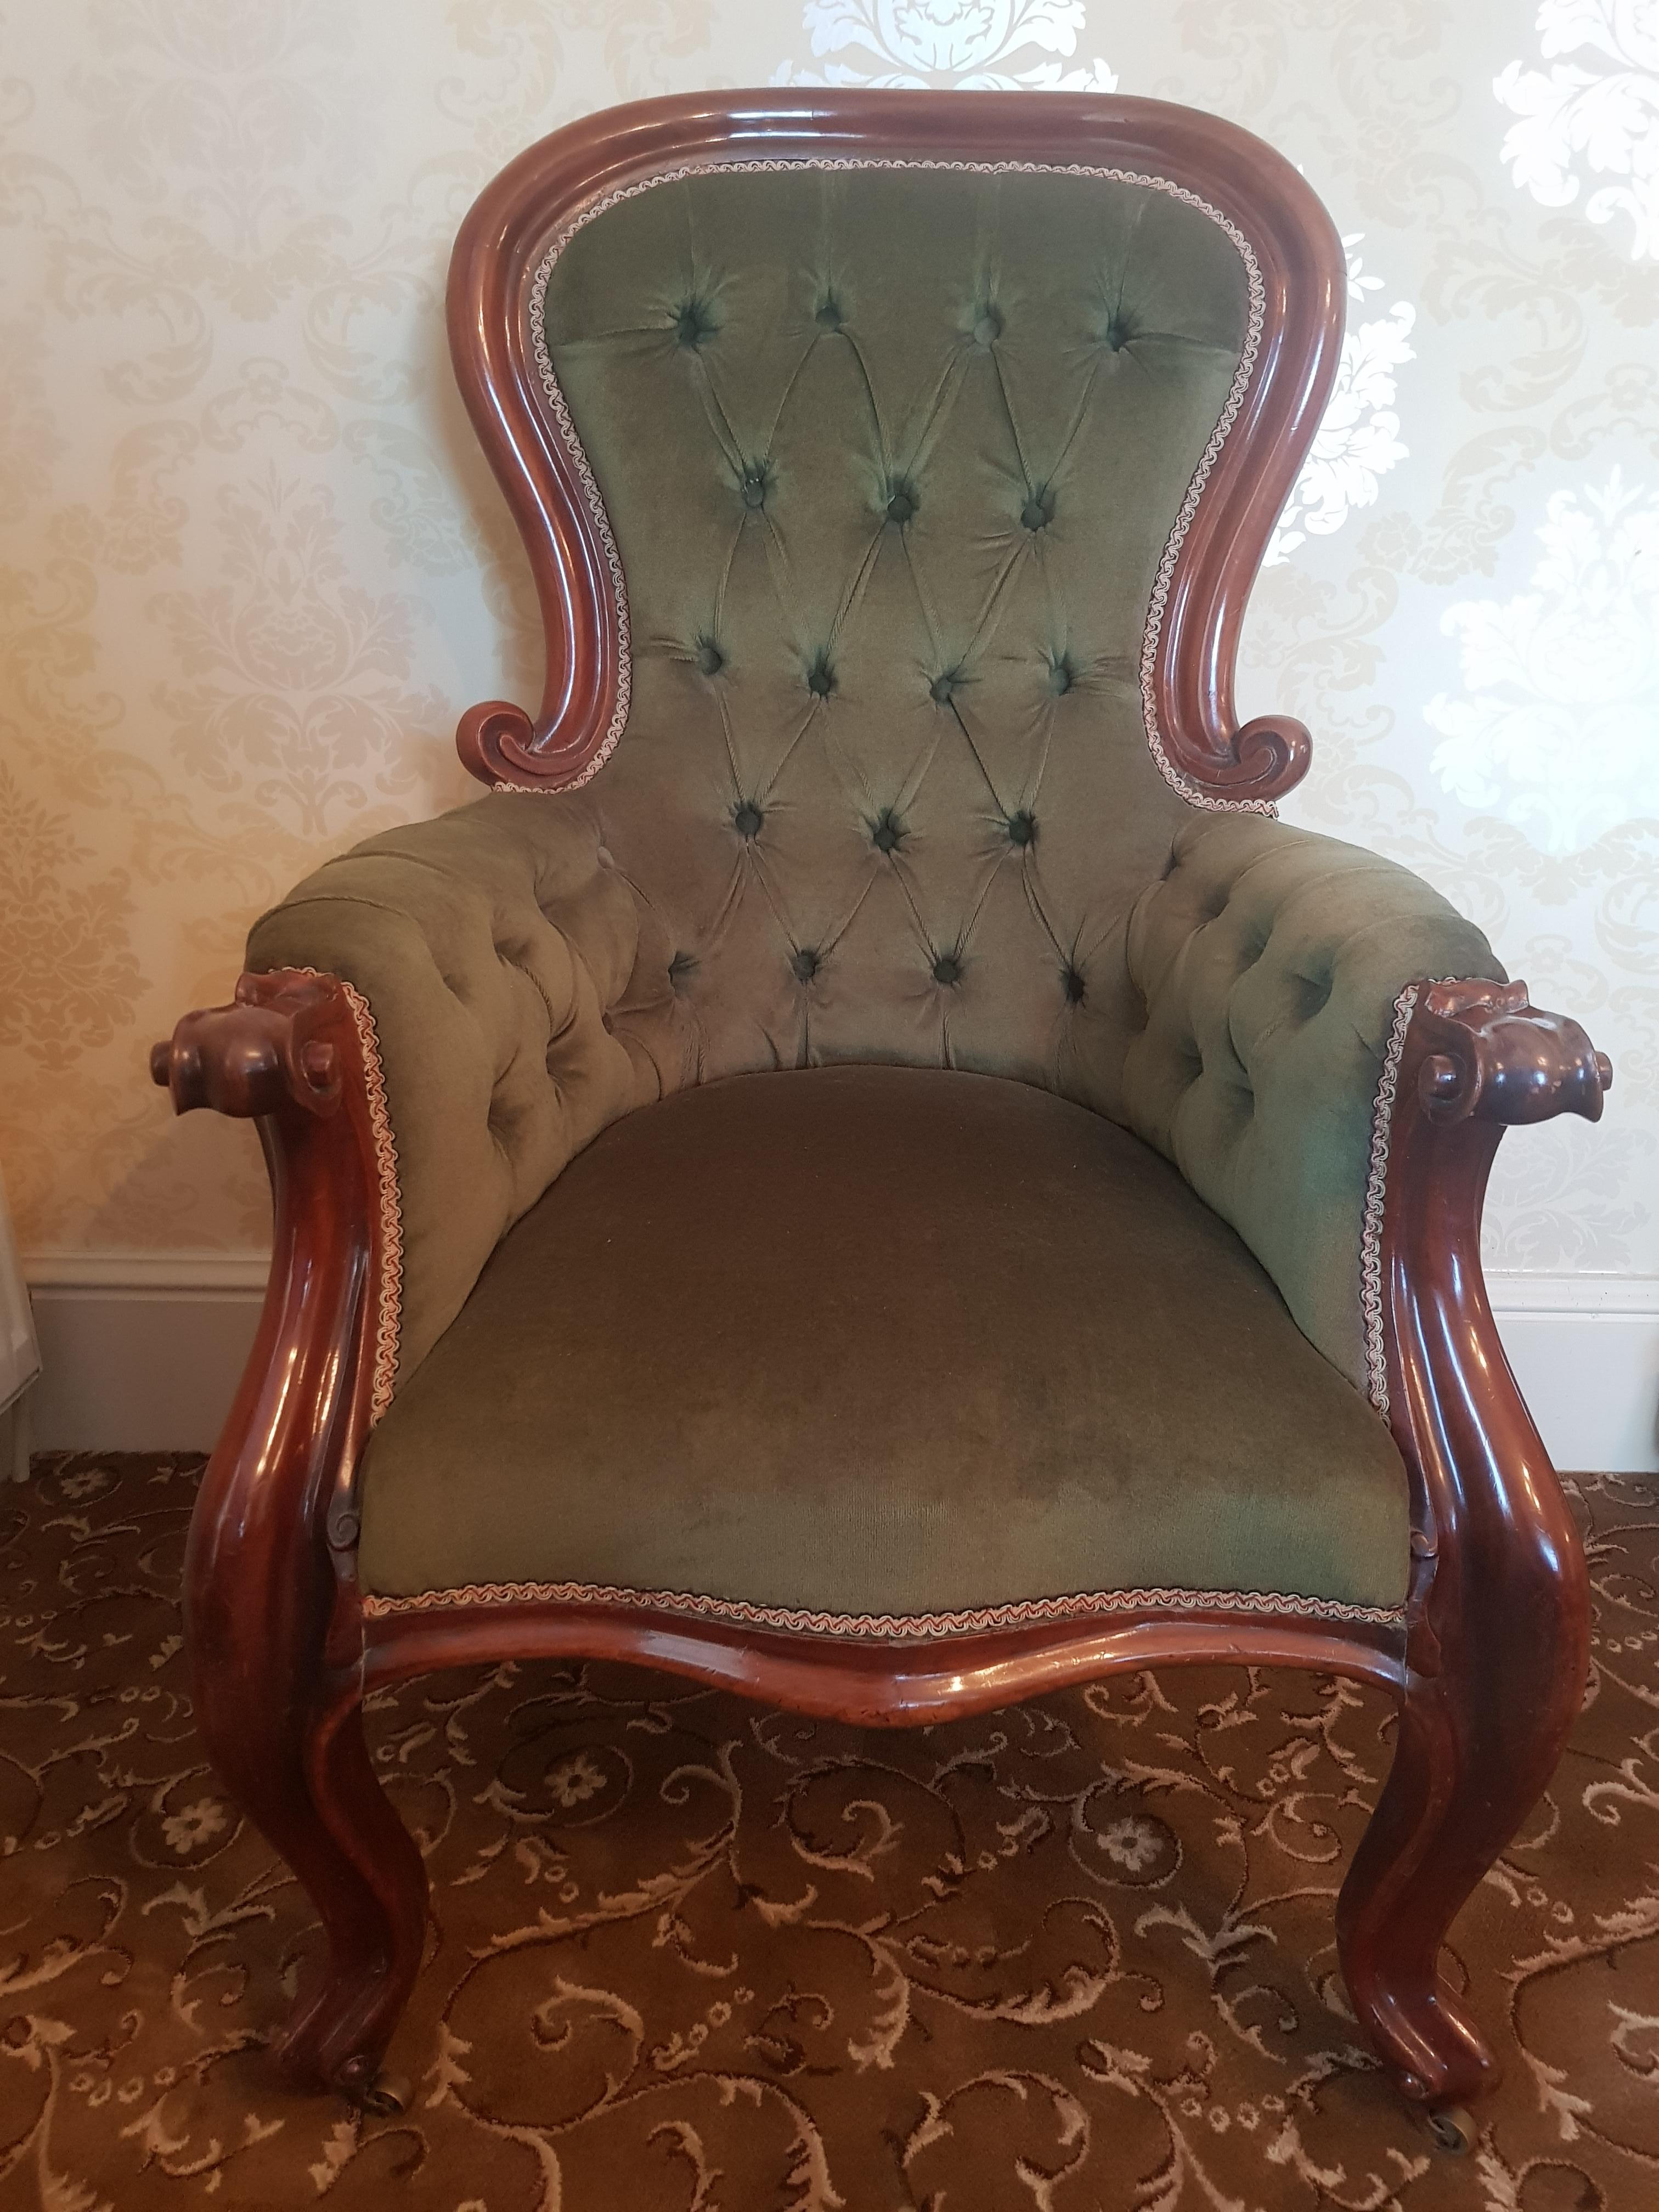 A fine Victorian mahogany gentleman's armchair or Parlor chair, with rounded buttoned back, finely carved cabriole legs terminating on original brass castors. Upholstered in good quality sofa fabric.

With accompanying foot rest.